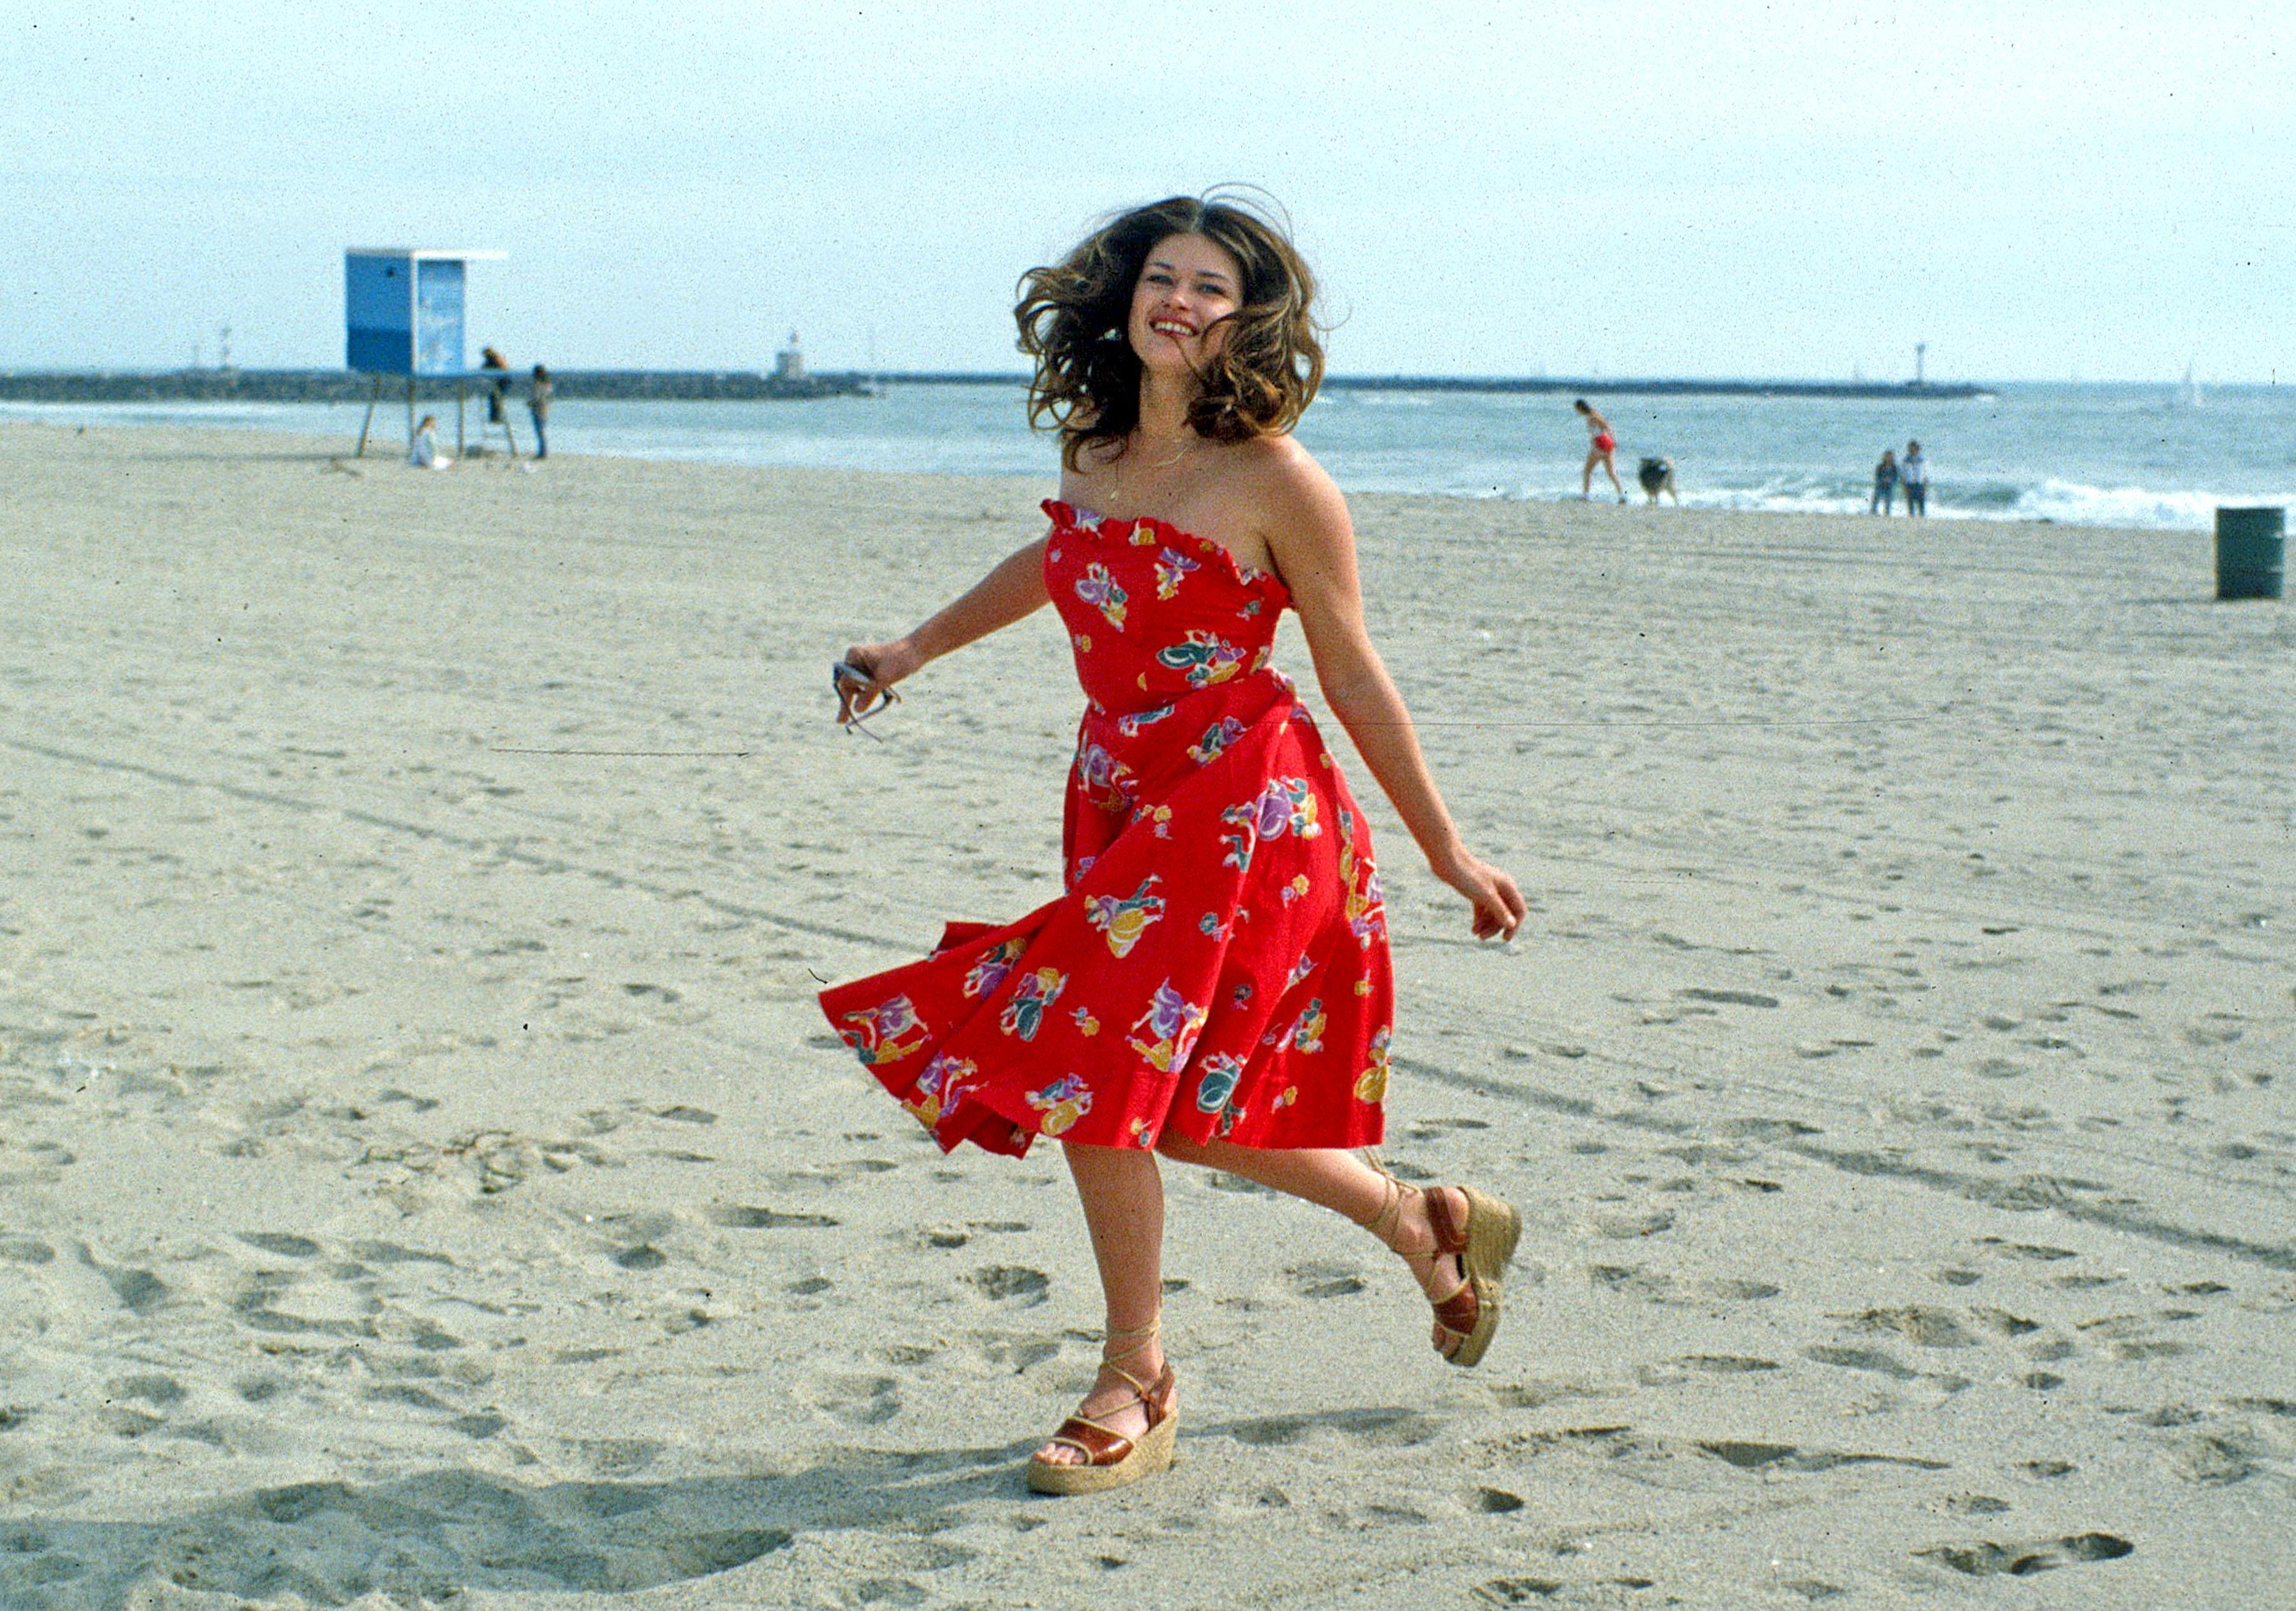 Jayne Marie Mansfield runs on Hollywood Beach on September 12, 1979, in Oxnard, California | Source: Getty Images